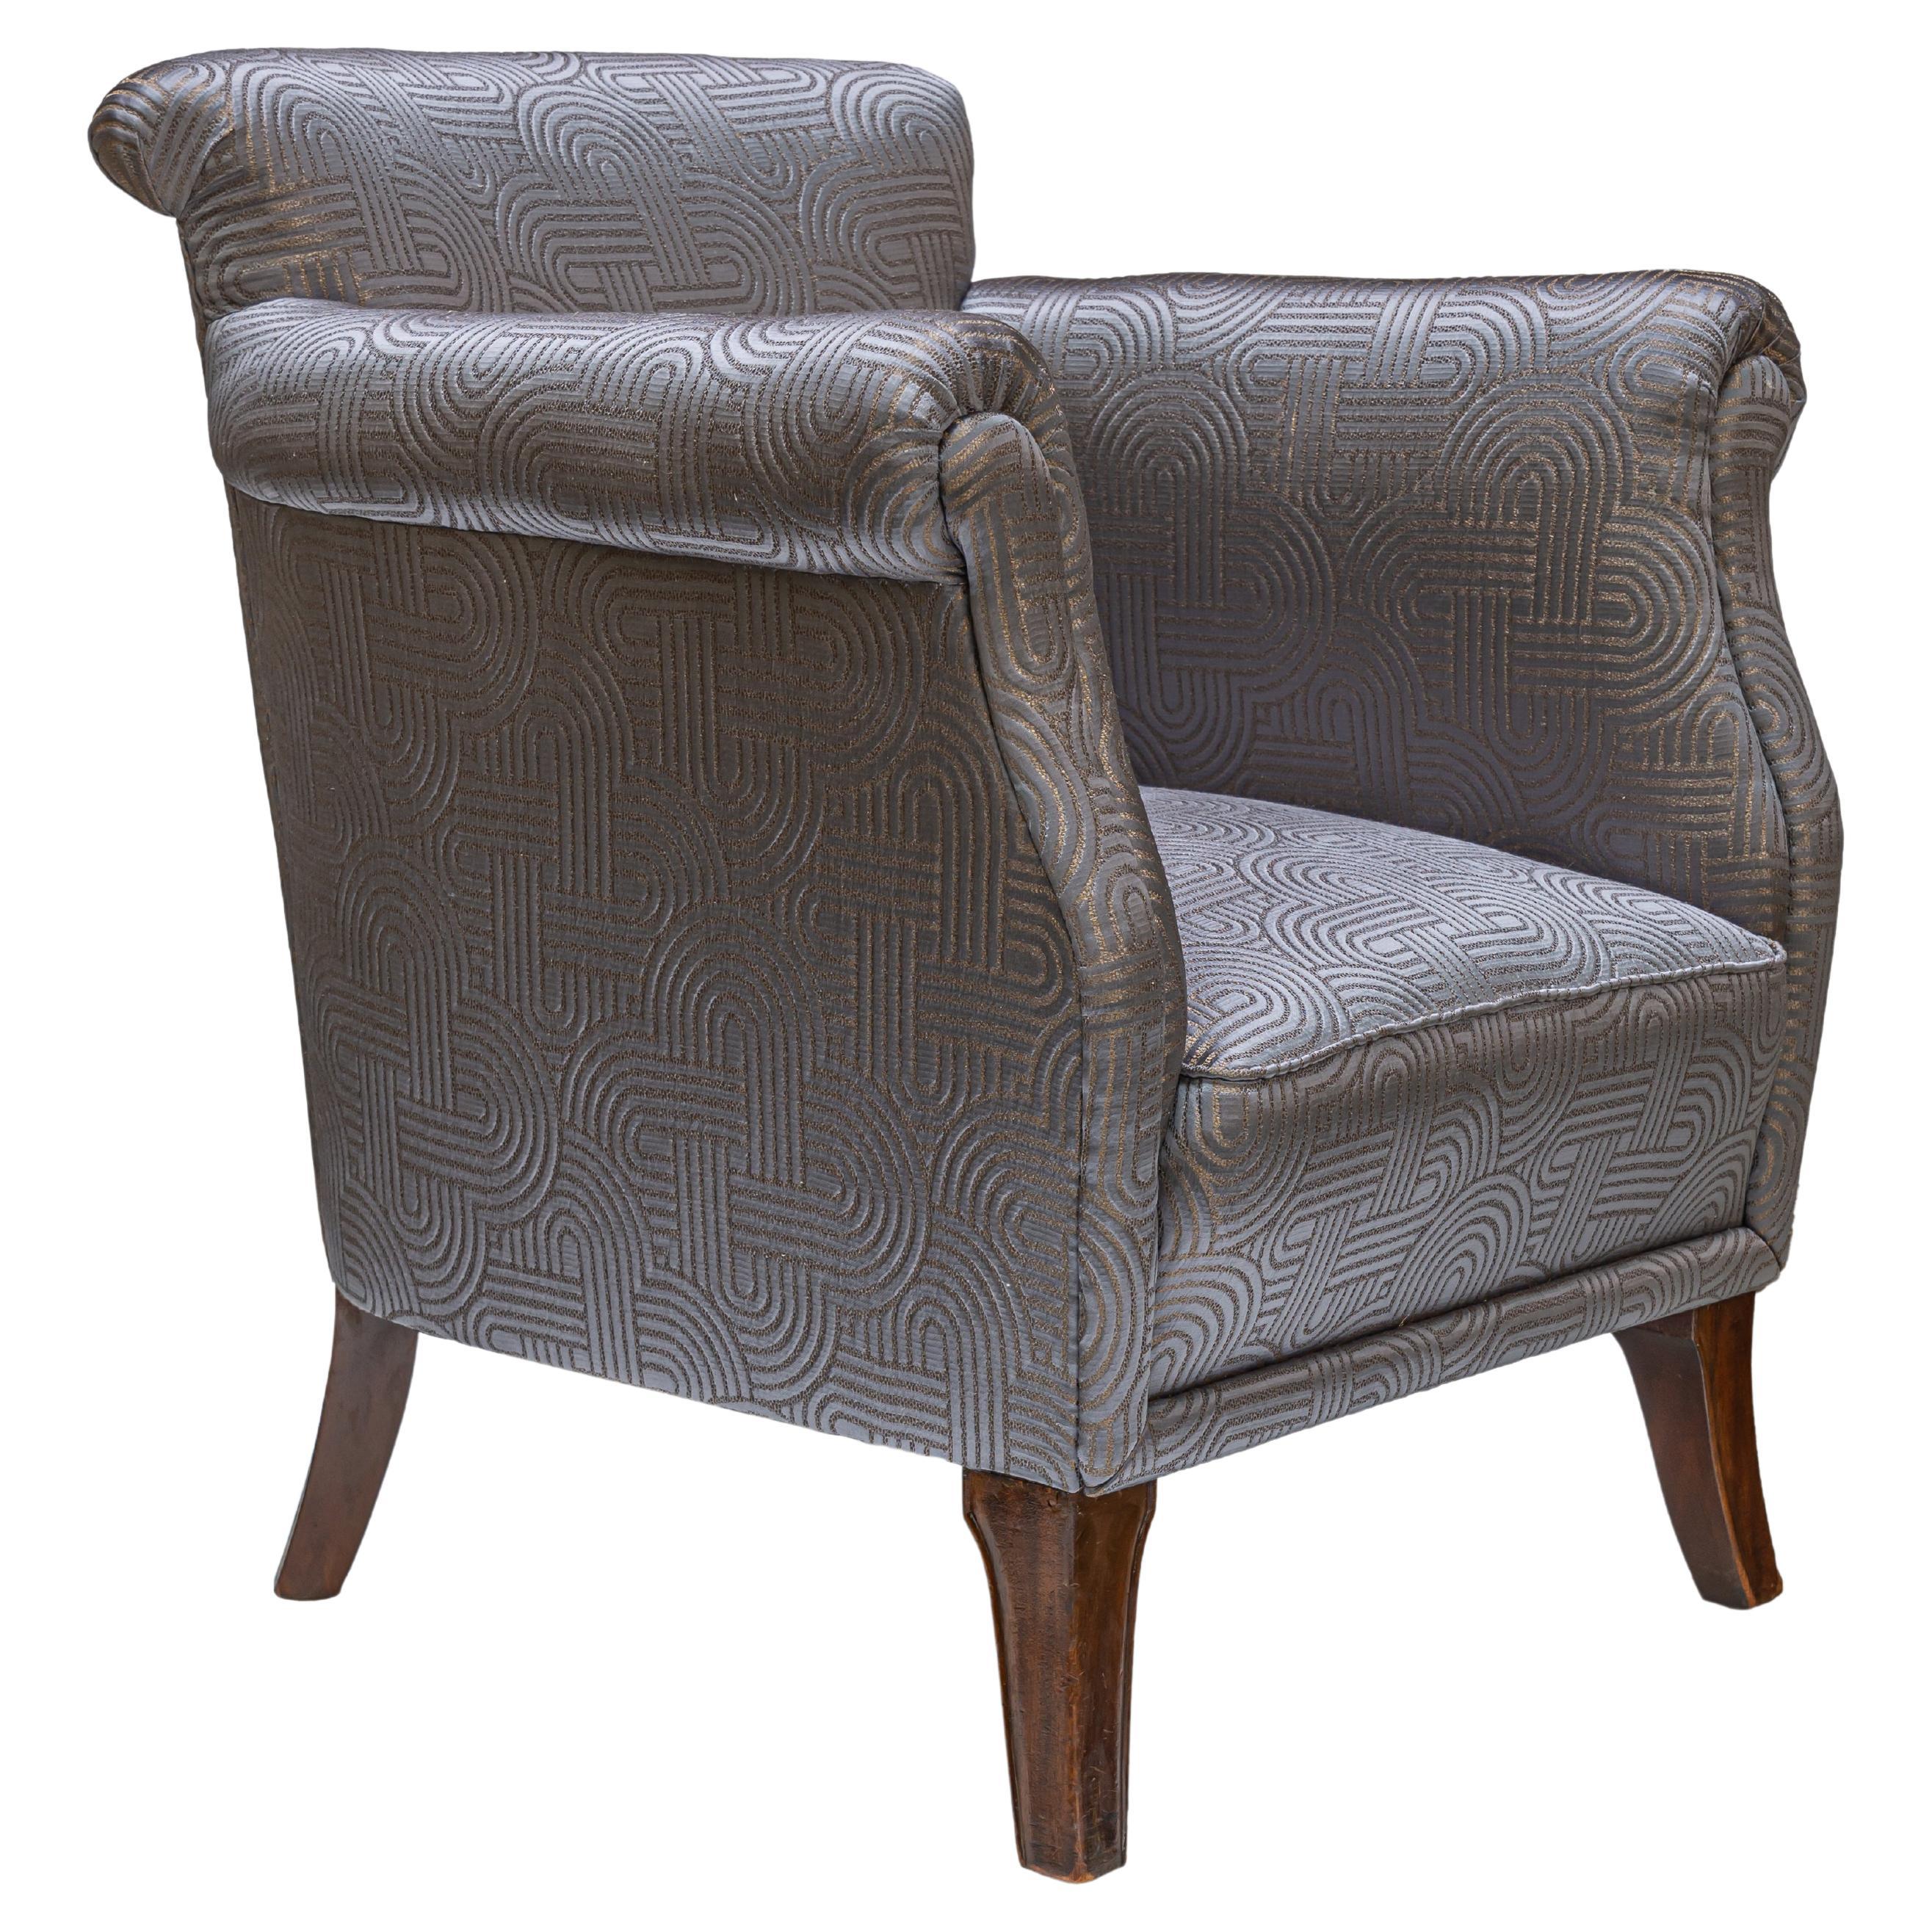 1930s Art Deco French Design Armchair in Satin Grey Upholstery Wall Nut Wood For Sale